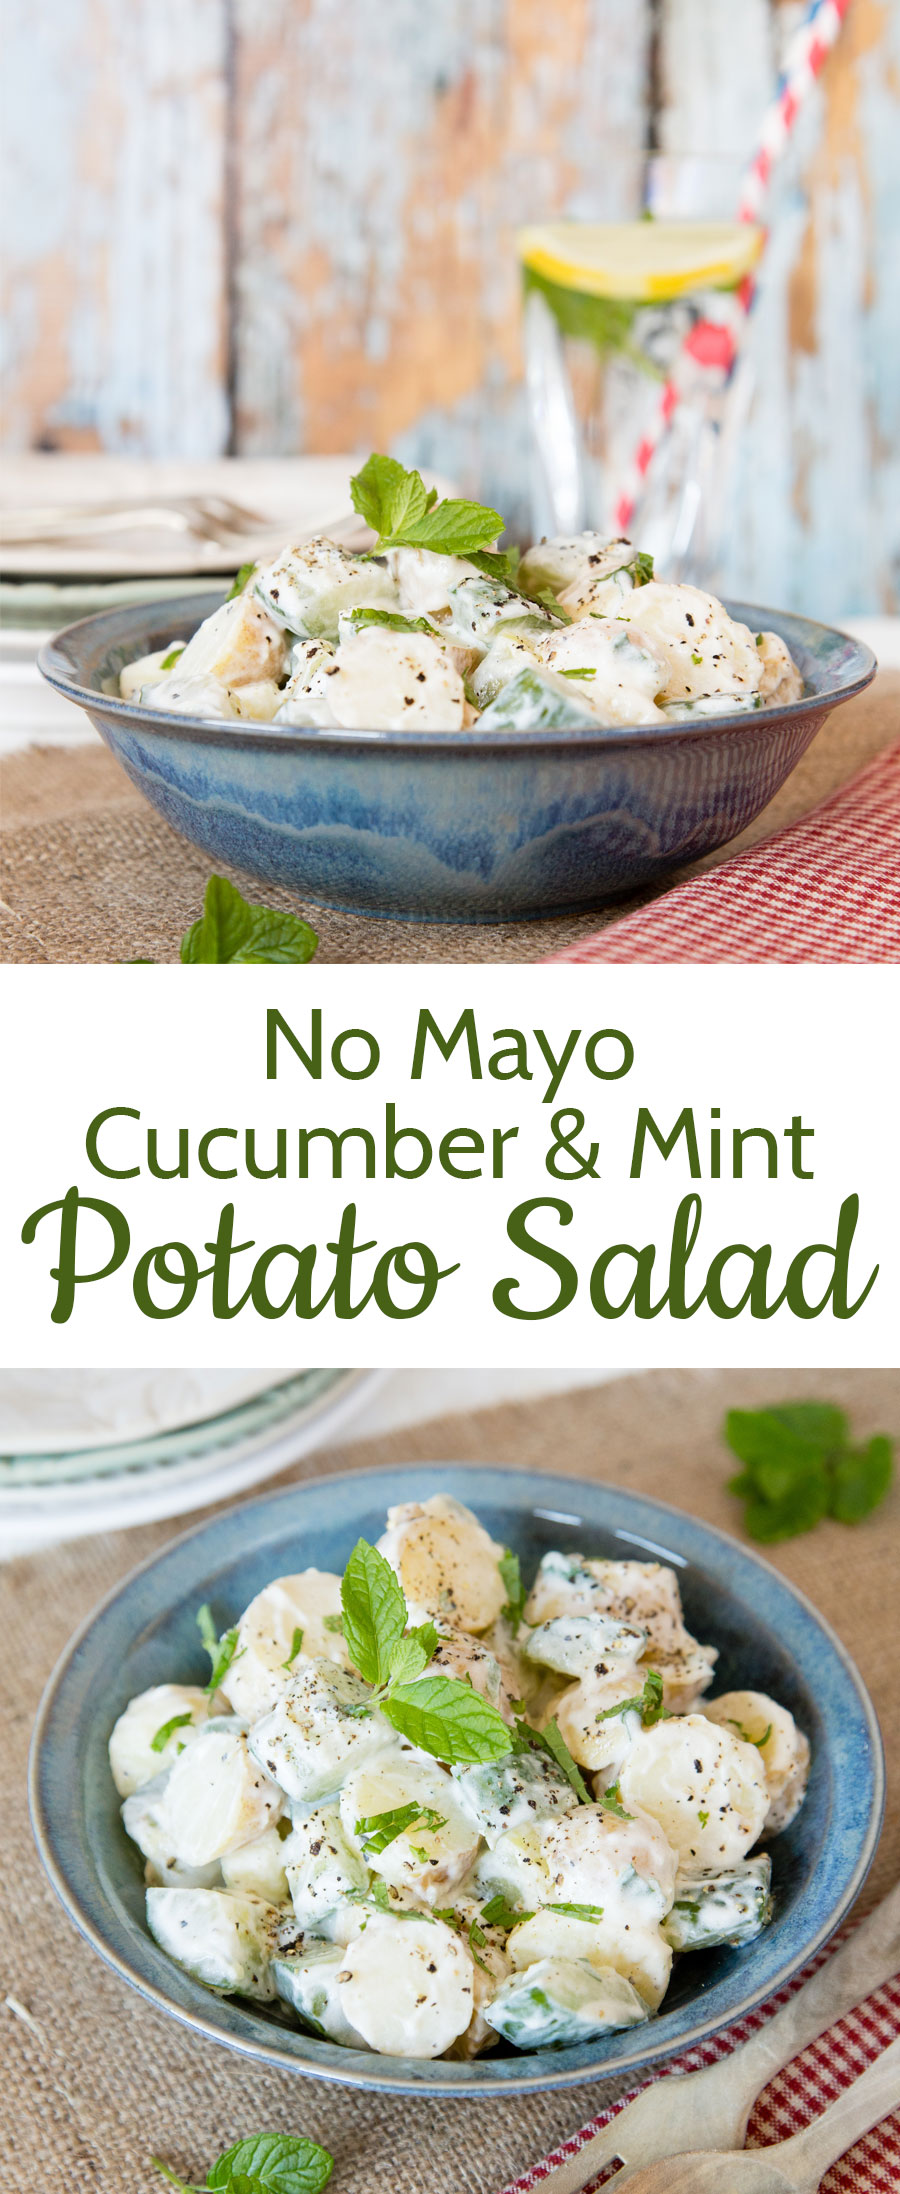 This healthy potato salad is made without mayo and includes cool mint and cucumber for a low heat, simple summer side dish.